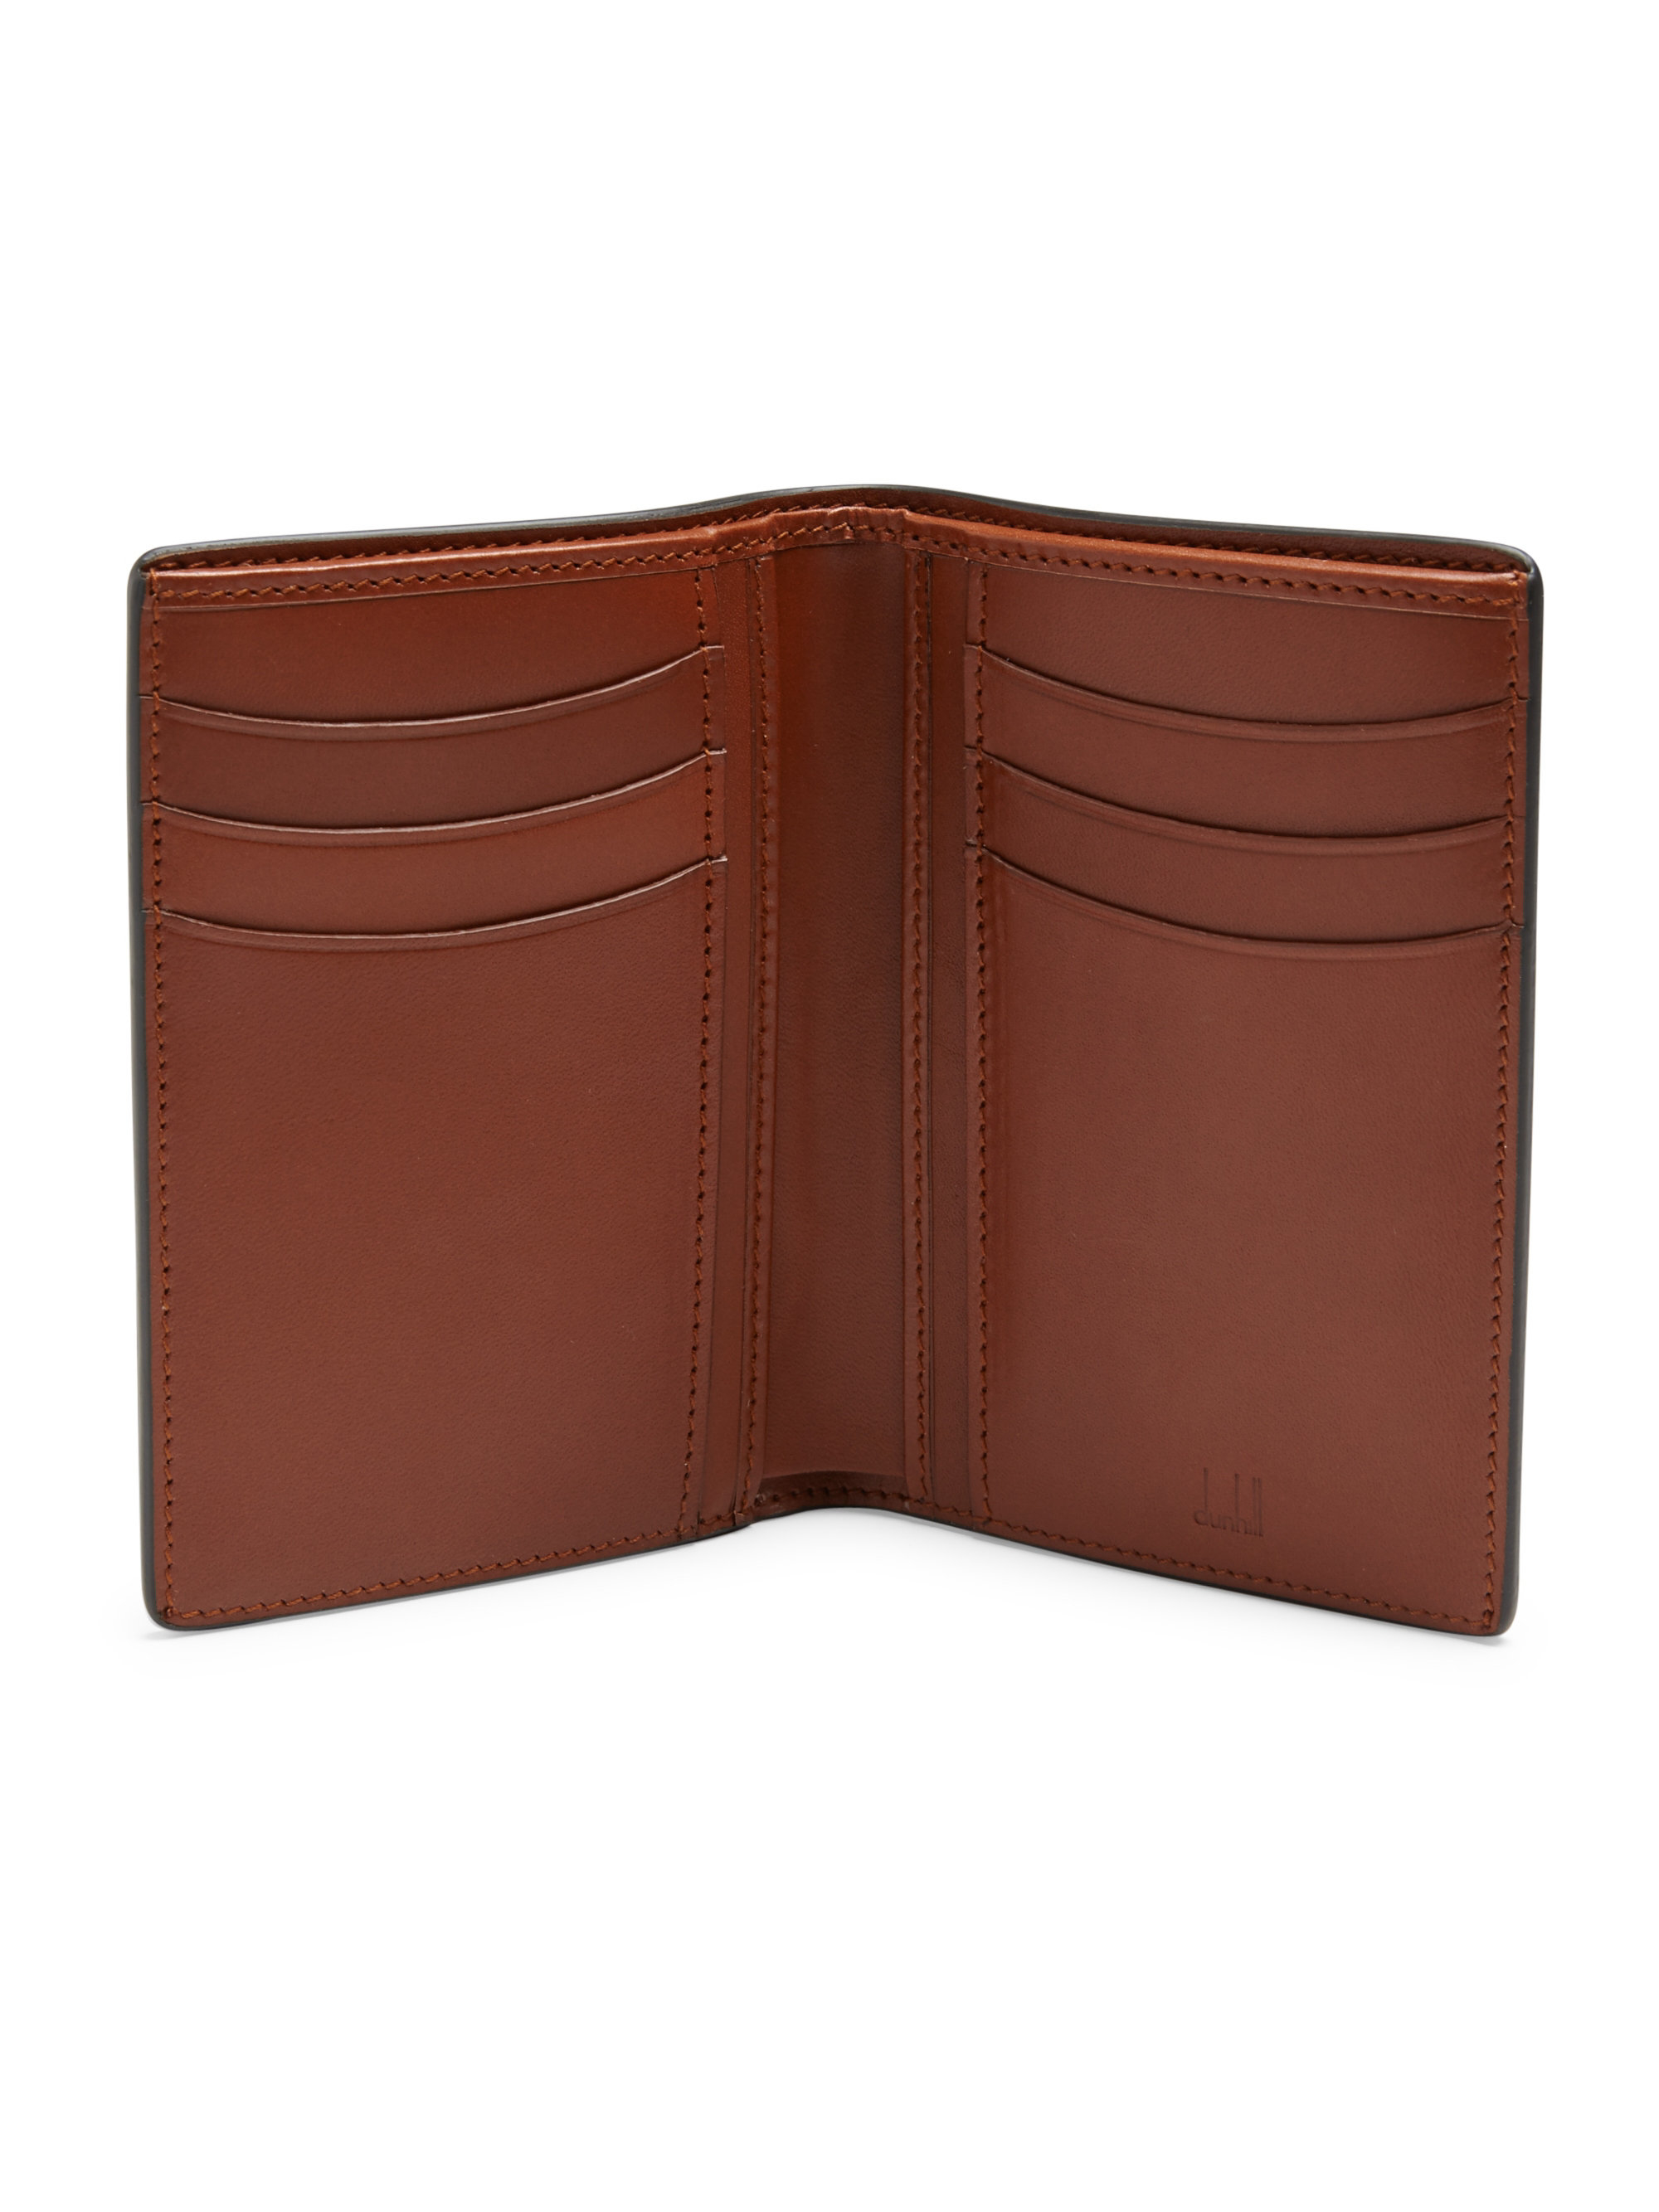 Lyst - Dunhill Chassis Small Vertical Leather Bifold Wallet in Brown for Men